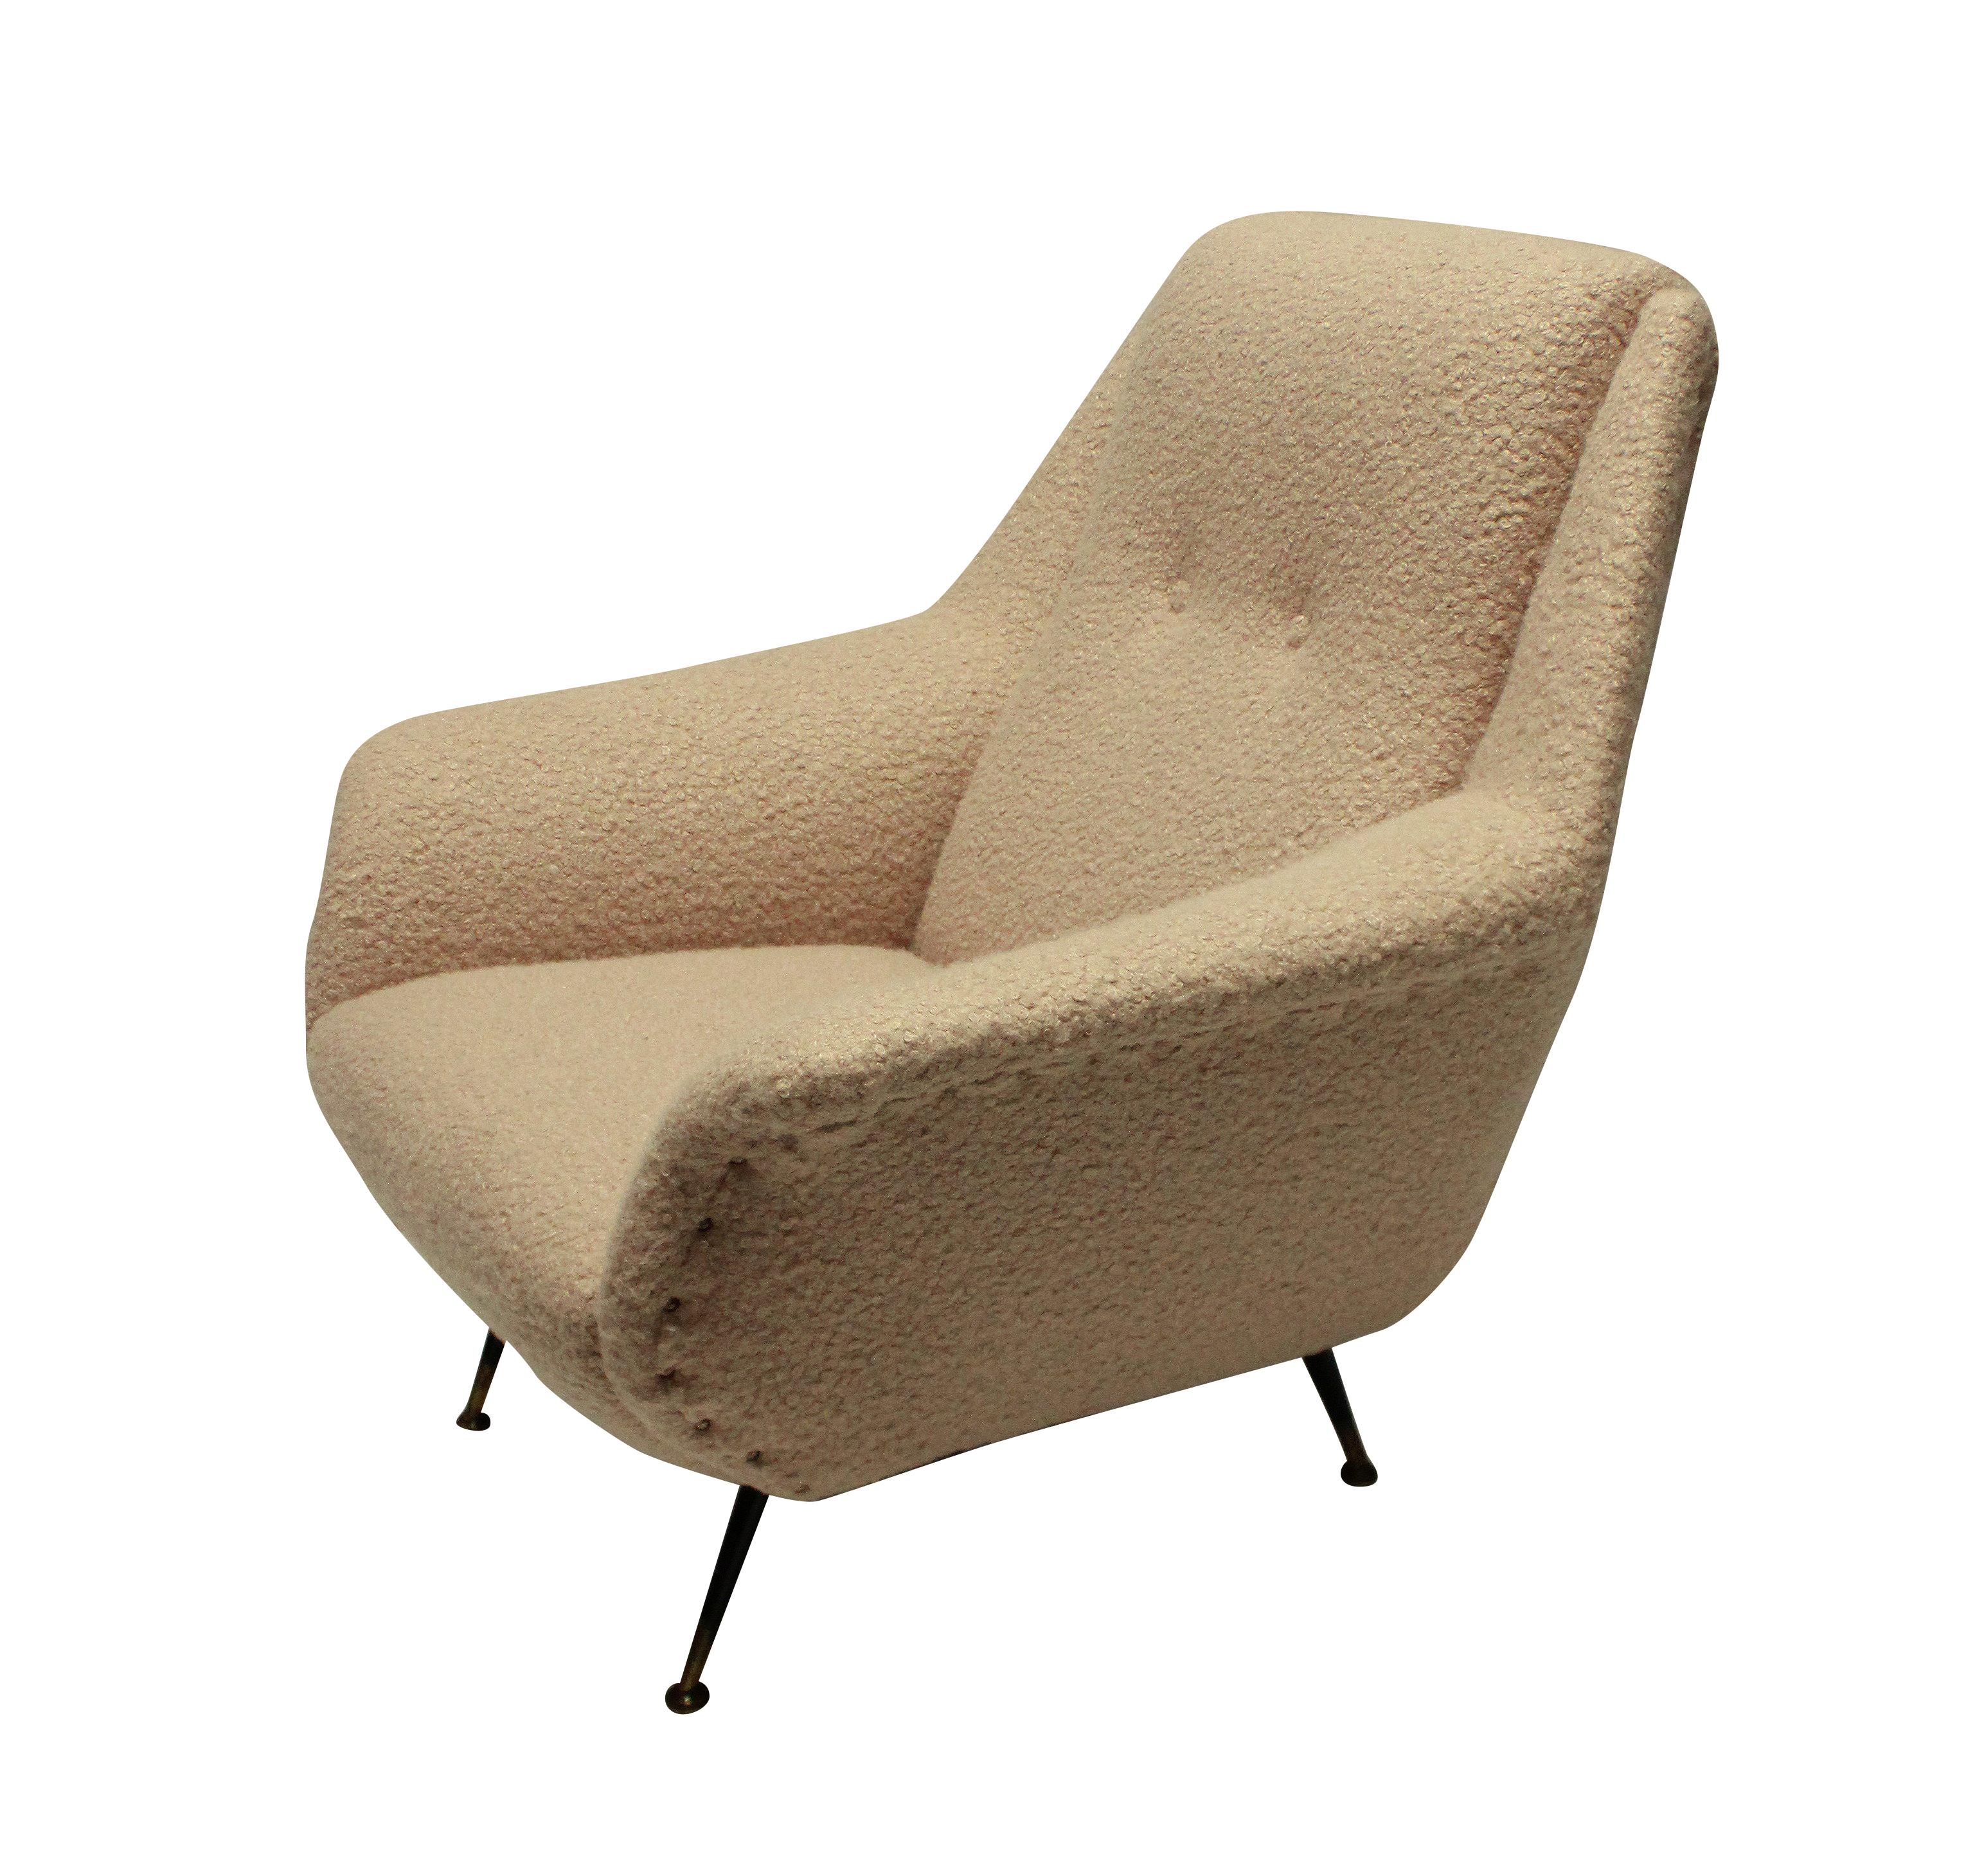 An Italian armchair by Gio Ponti. Newly upholstered in designers Guild's Baluchi, a dusty pink lamb’s wool.